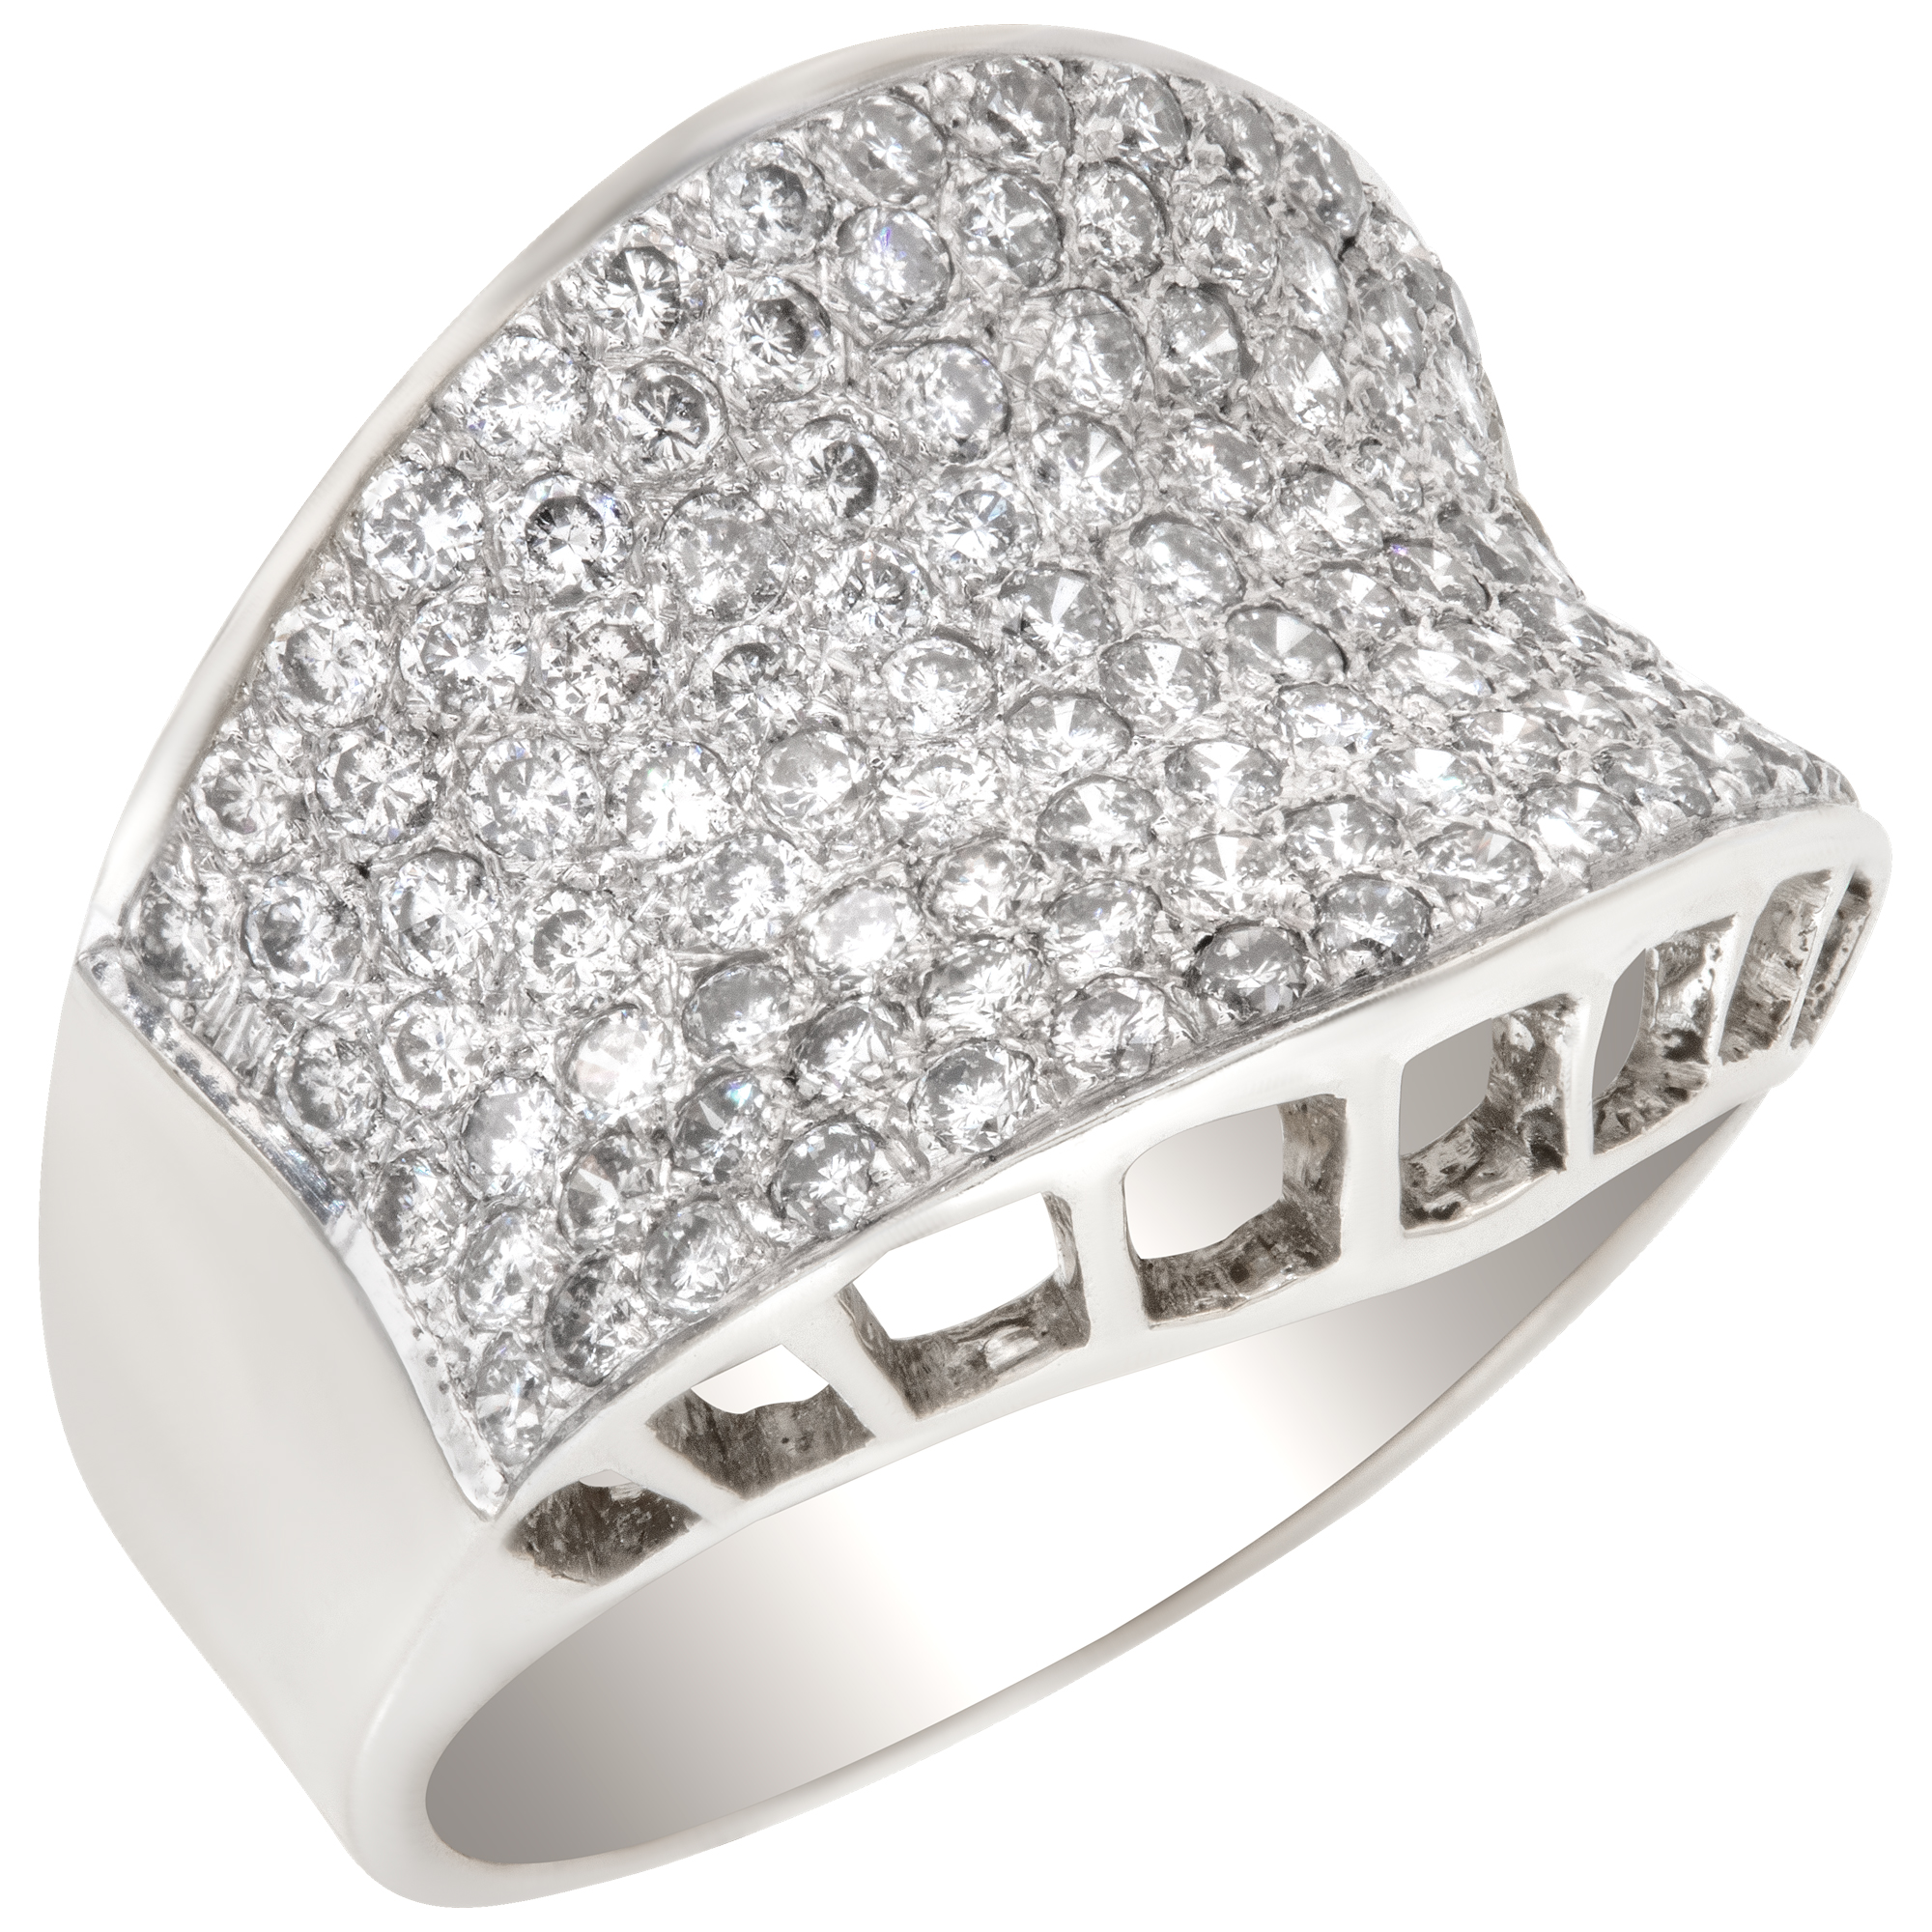 Exquisite pave diamond ring in white gold. 1.25 carats in pave diamonds. Size 6 image 3